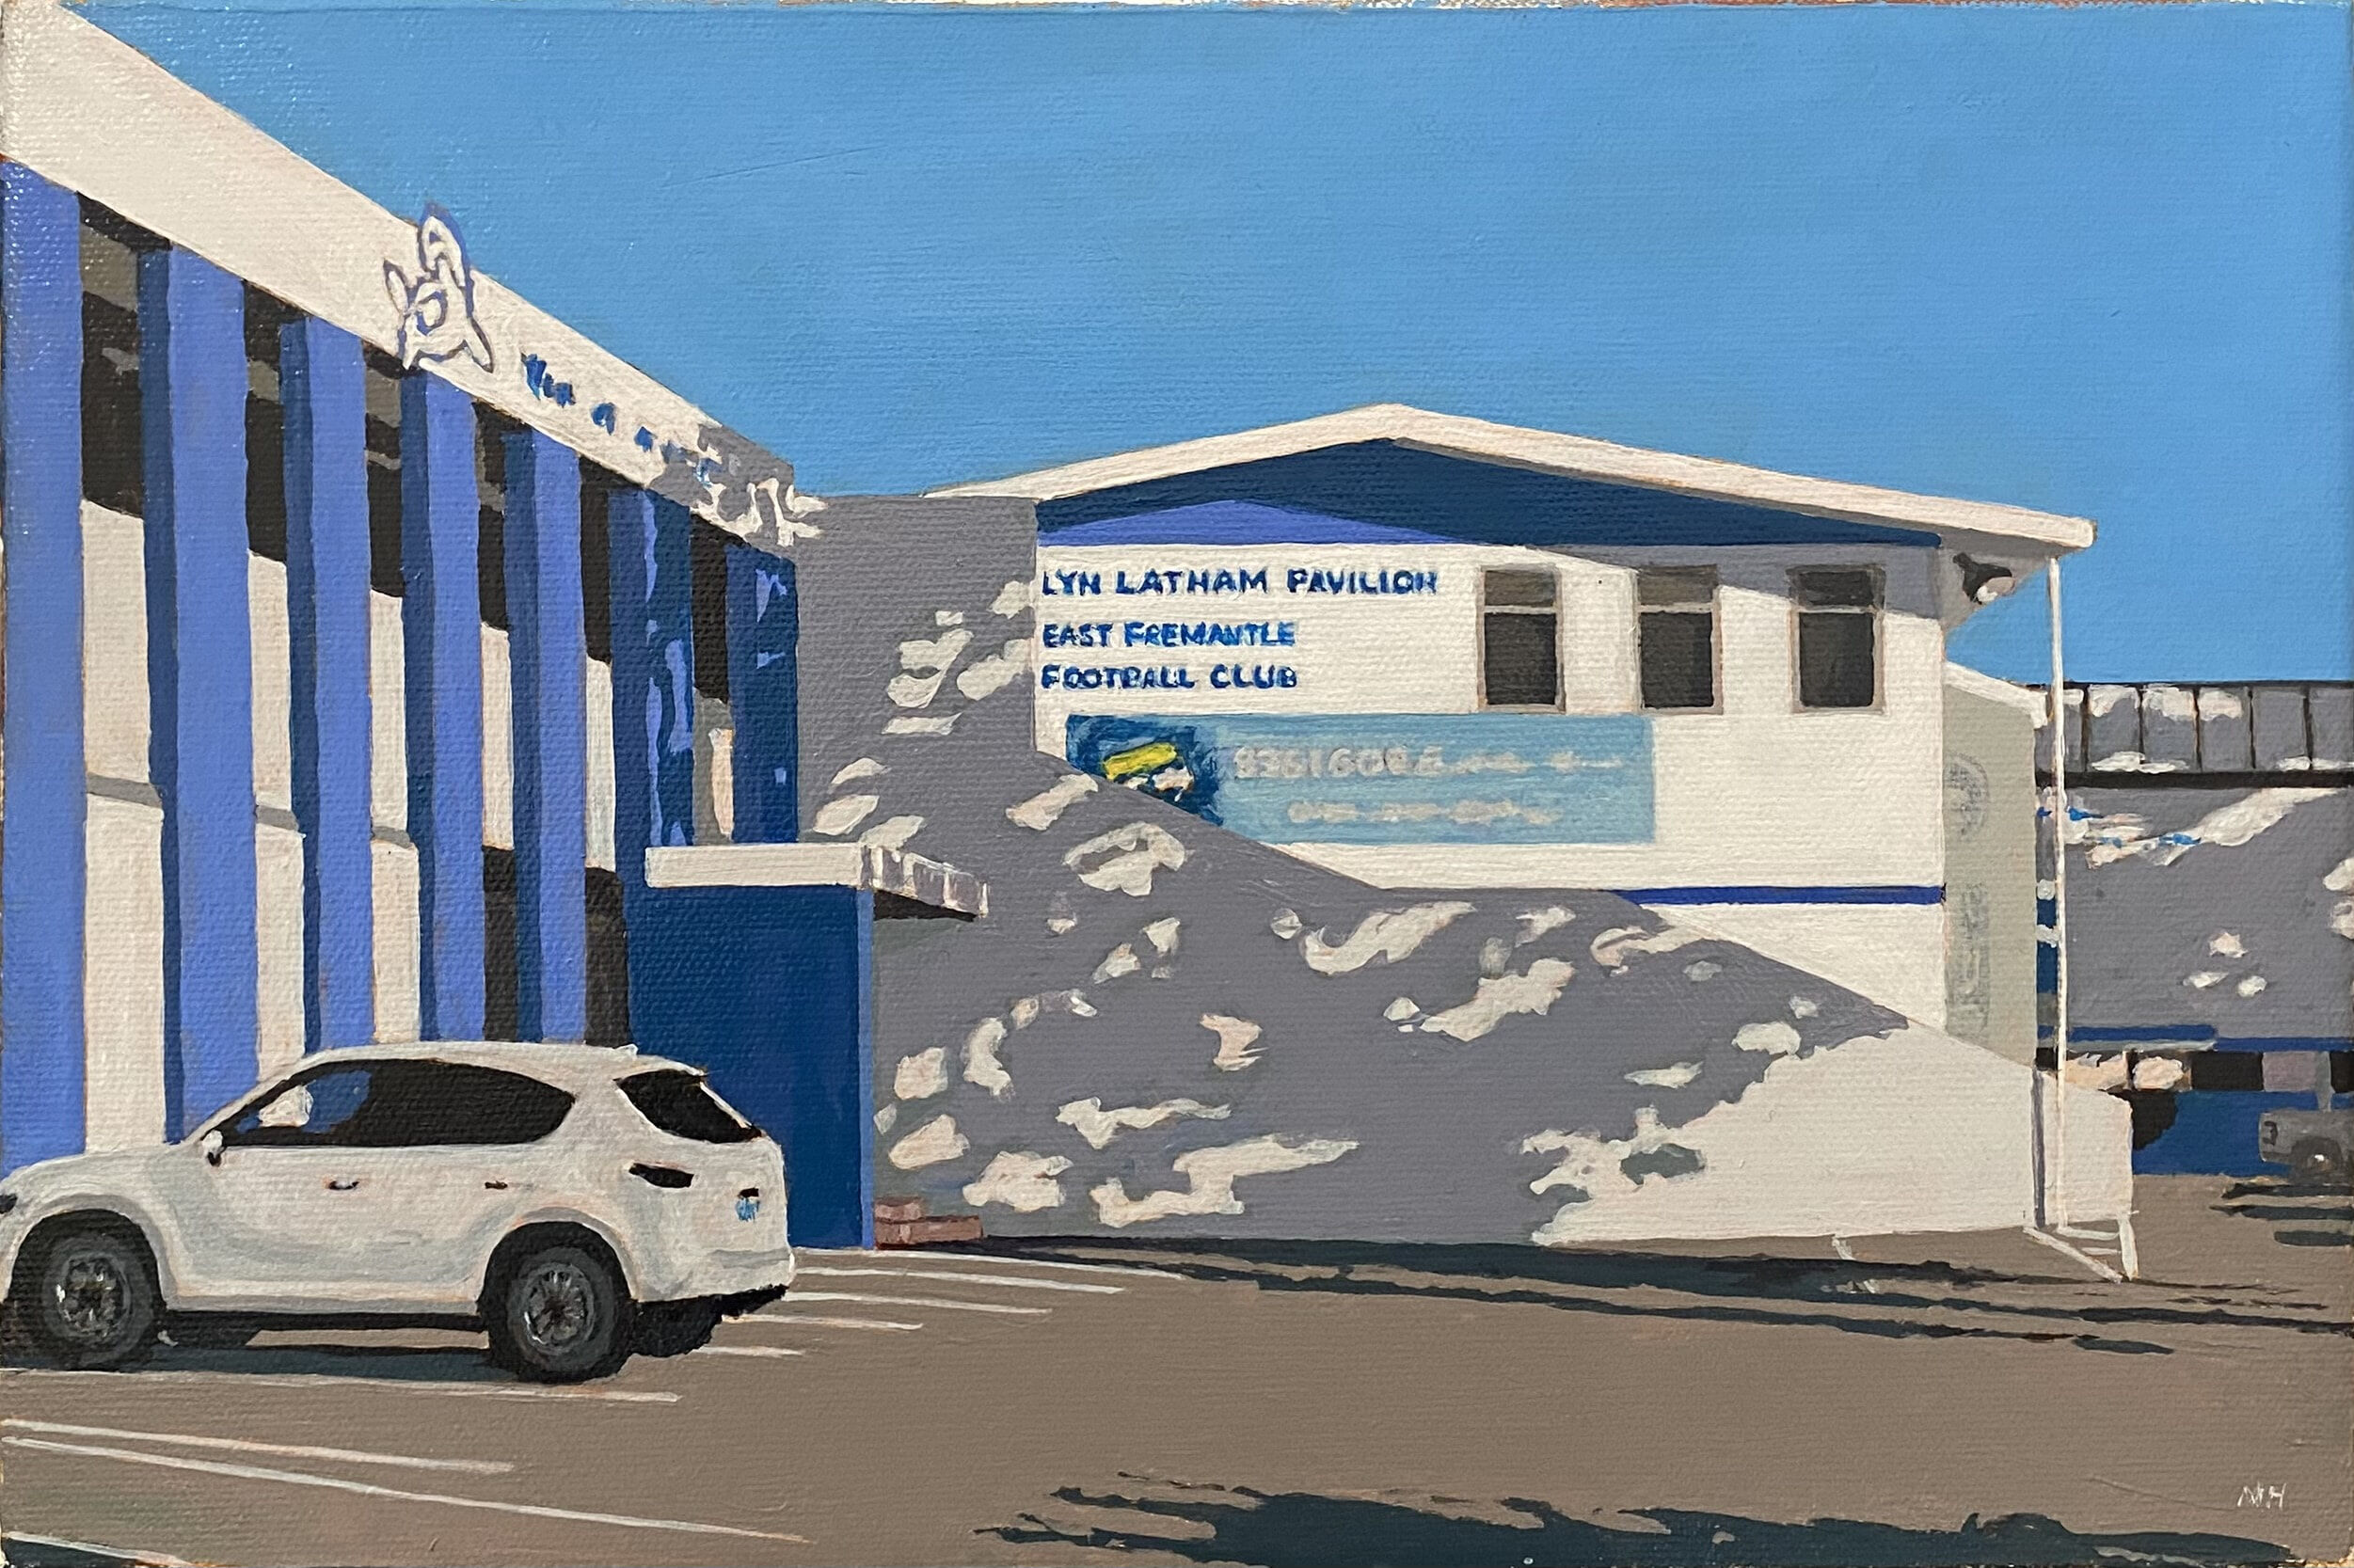 East Fremantle Oval #4 acrylic on canvas 20 by 30cm